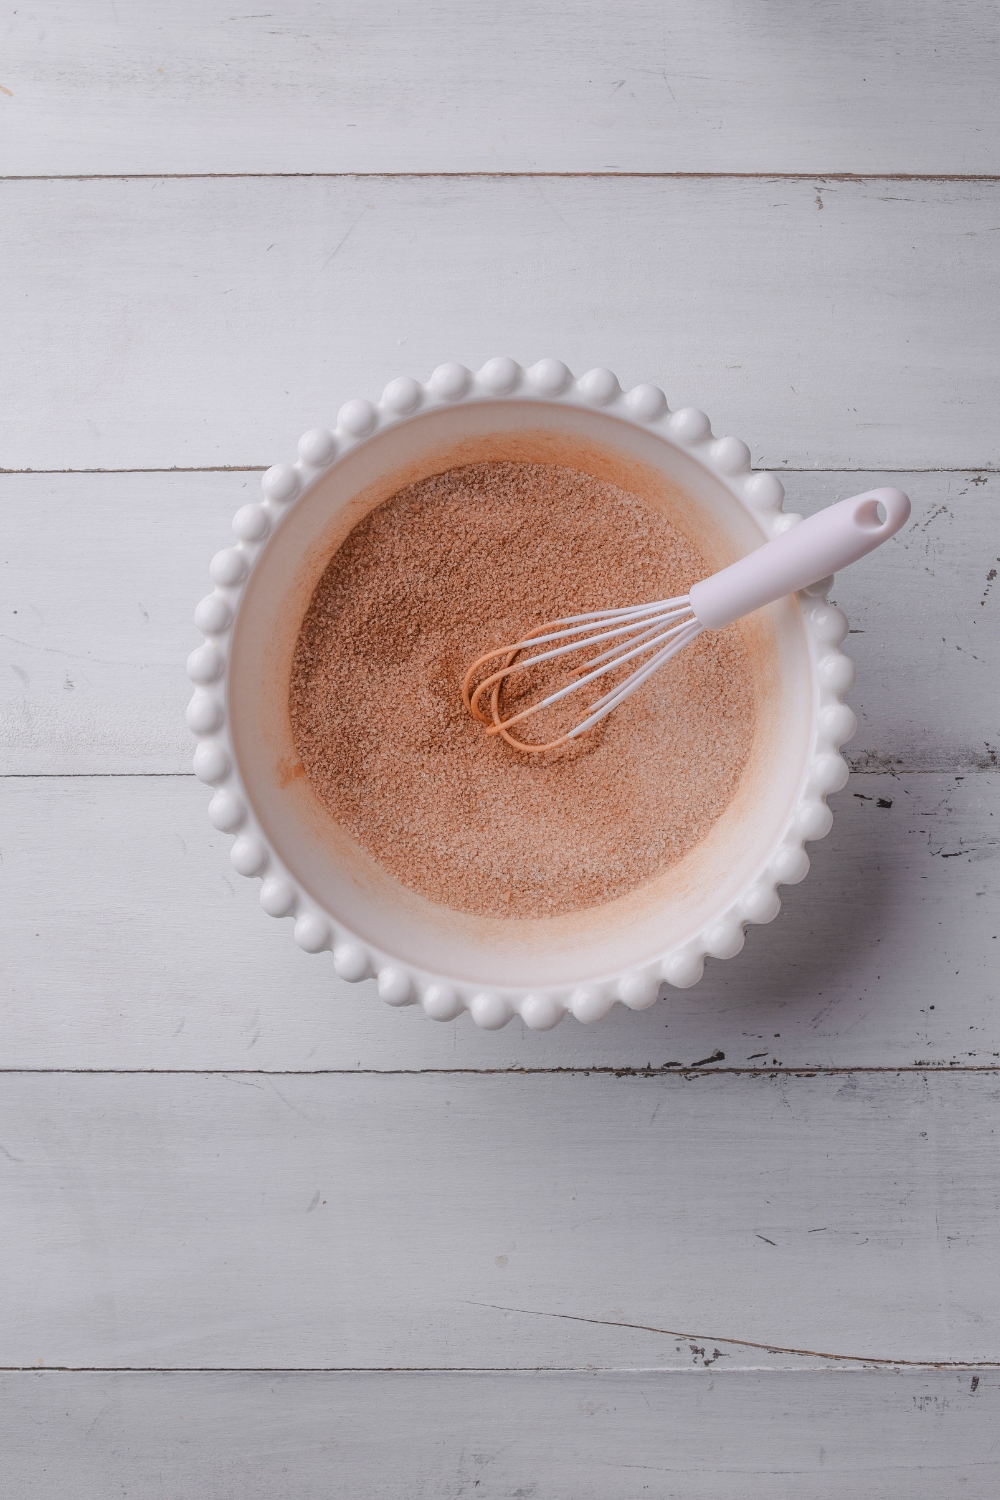 A white bowl holds the cinnamon and sugar mixture. A white whisk rests in the bowl, also.